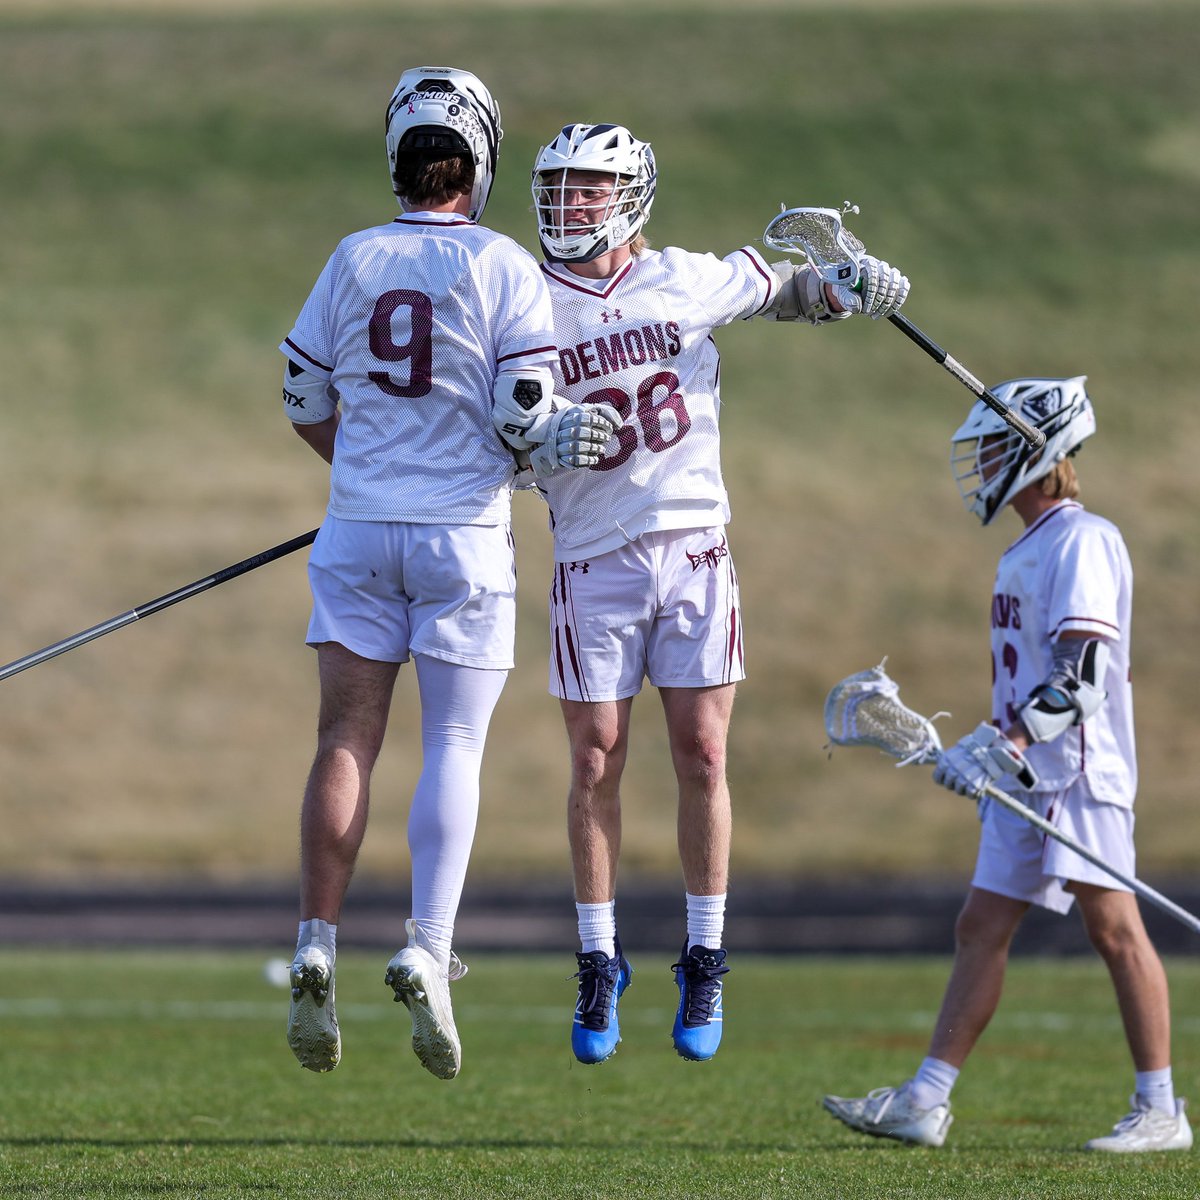 Golden BLAX whoops Ponderosa 16-3 @GhsRowdies @goldenlax @JeffcoAthletics @MaxPreps @CHSAA (Full Gallery of Varsity Game Images Available at MaxPreps at t.maxpreps.com/3RgRcmS) Images of #11 Sam & #36 Jake